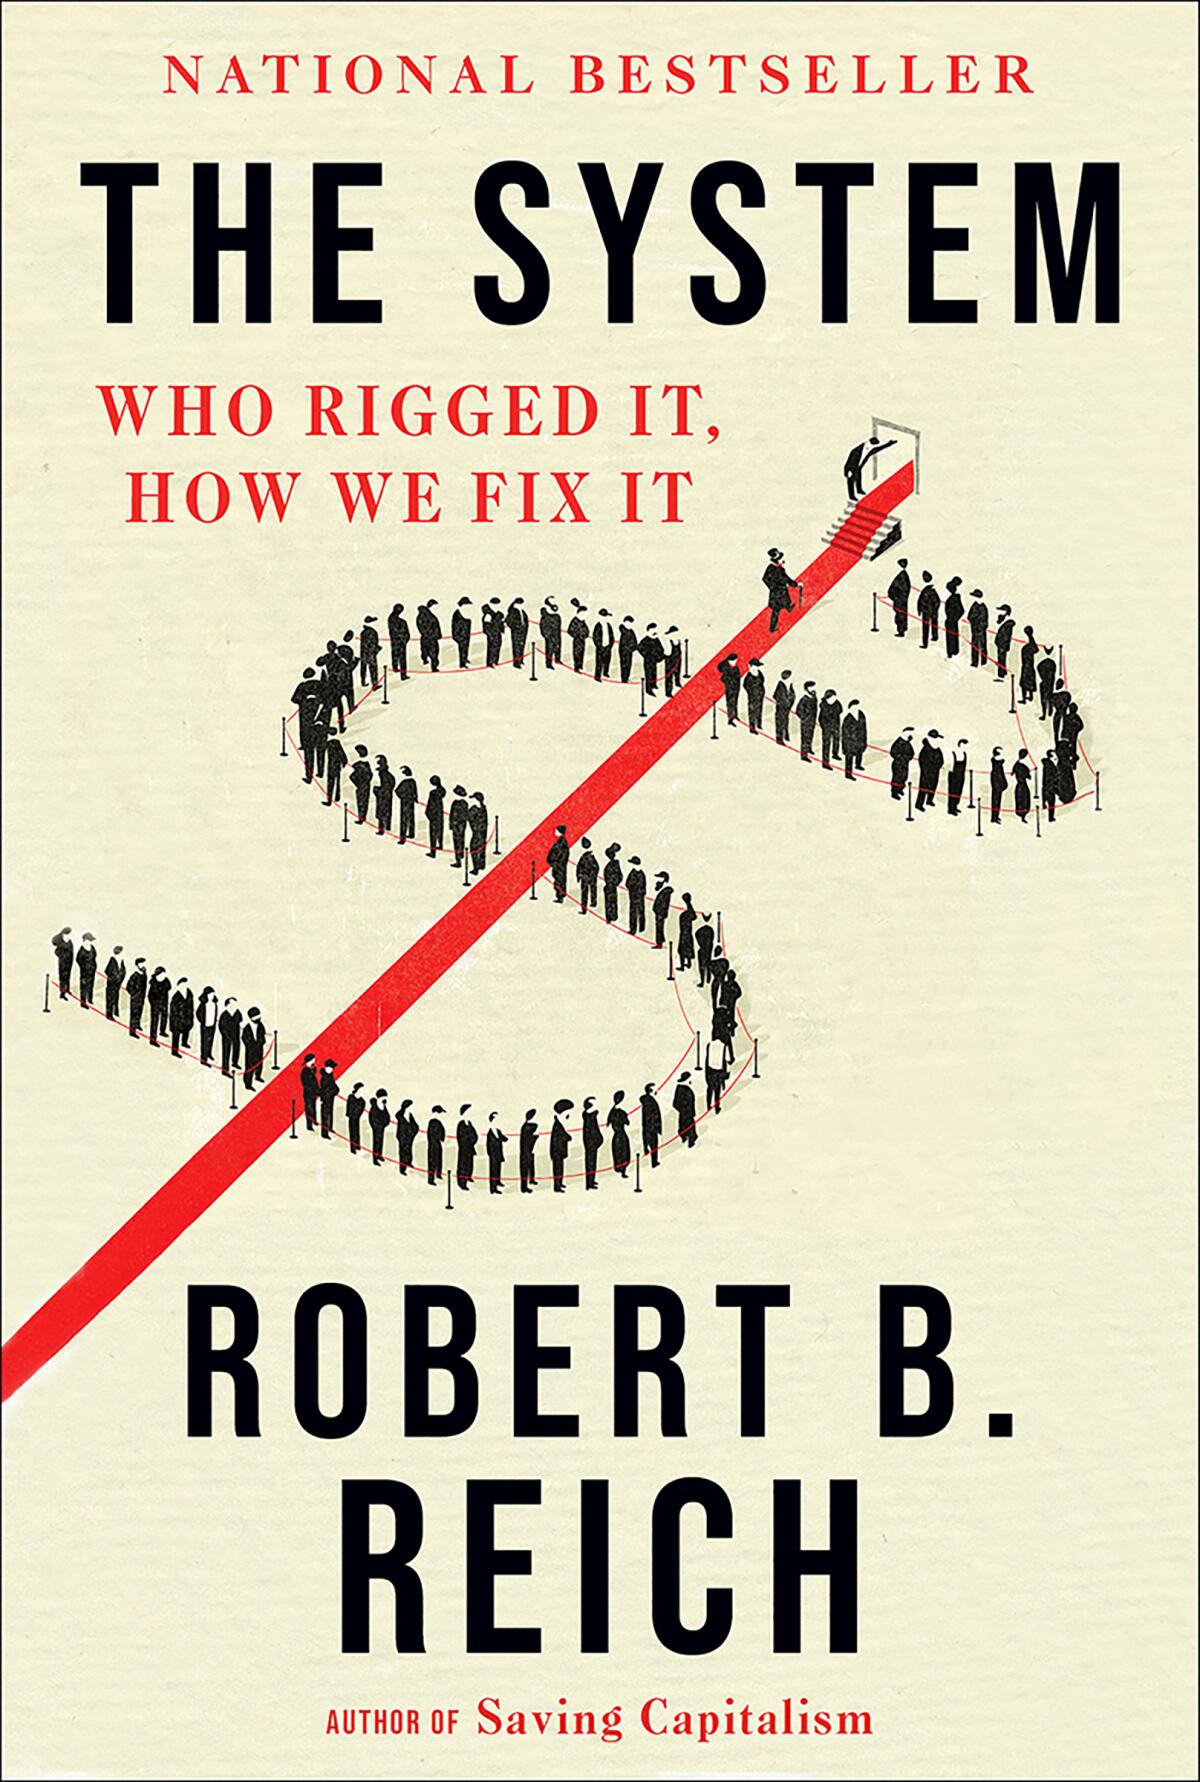 Book cover for "The System: Who Rigged It, How We Fix It" by Robert B. Reich.